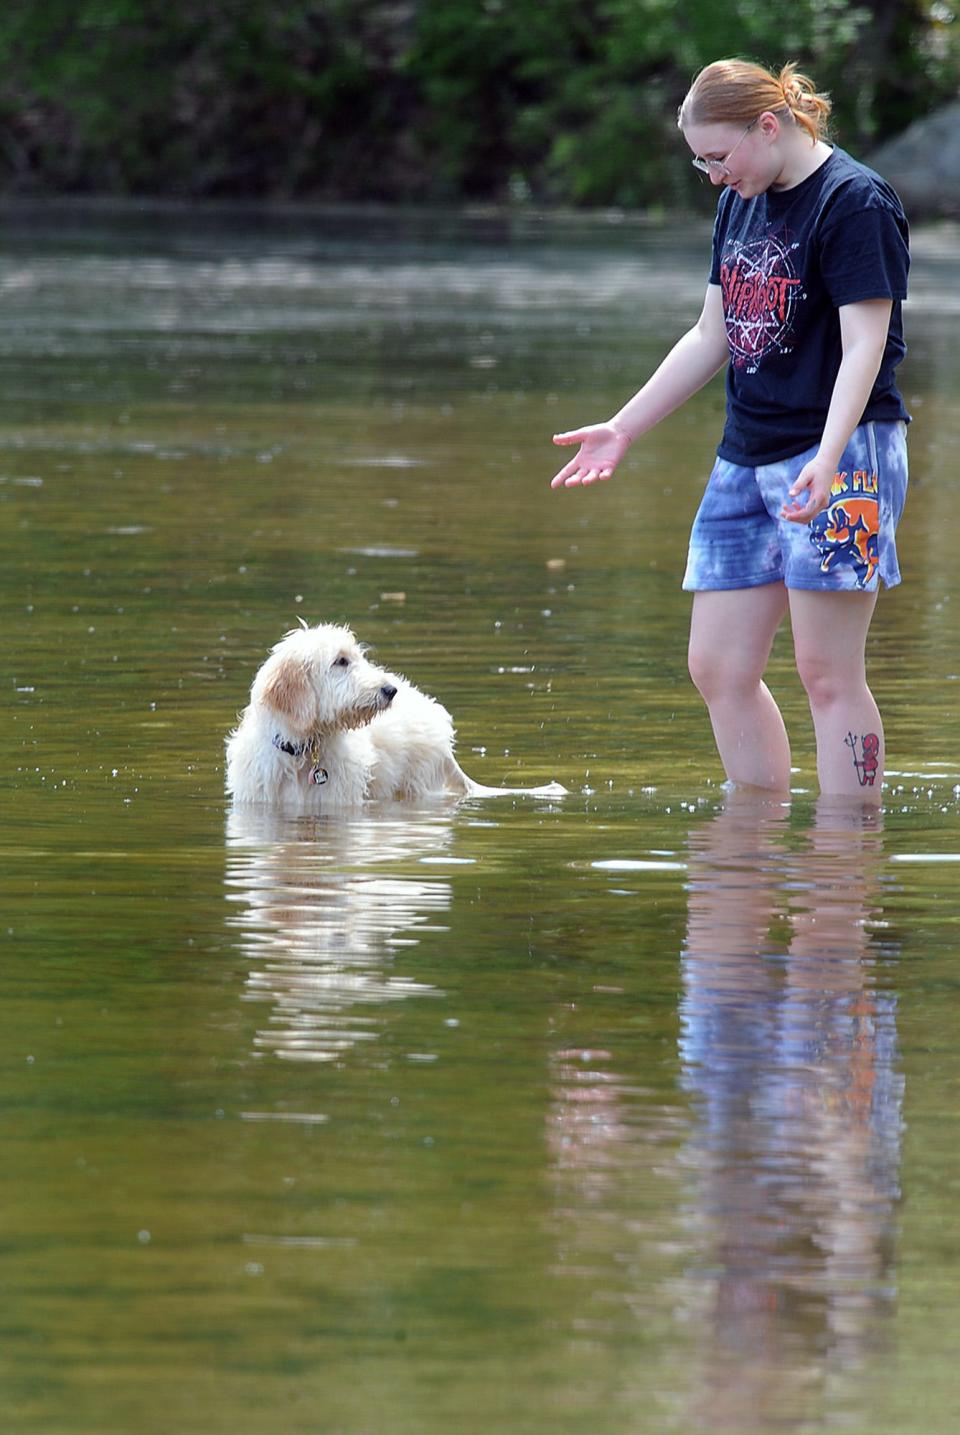 Marley, a golden doodle, and Jackie Revzin, of Worcester, get their feet wet at Ashland State Park, May 17, 2021.